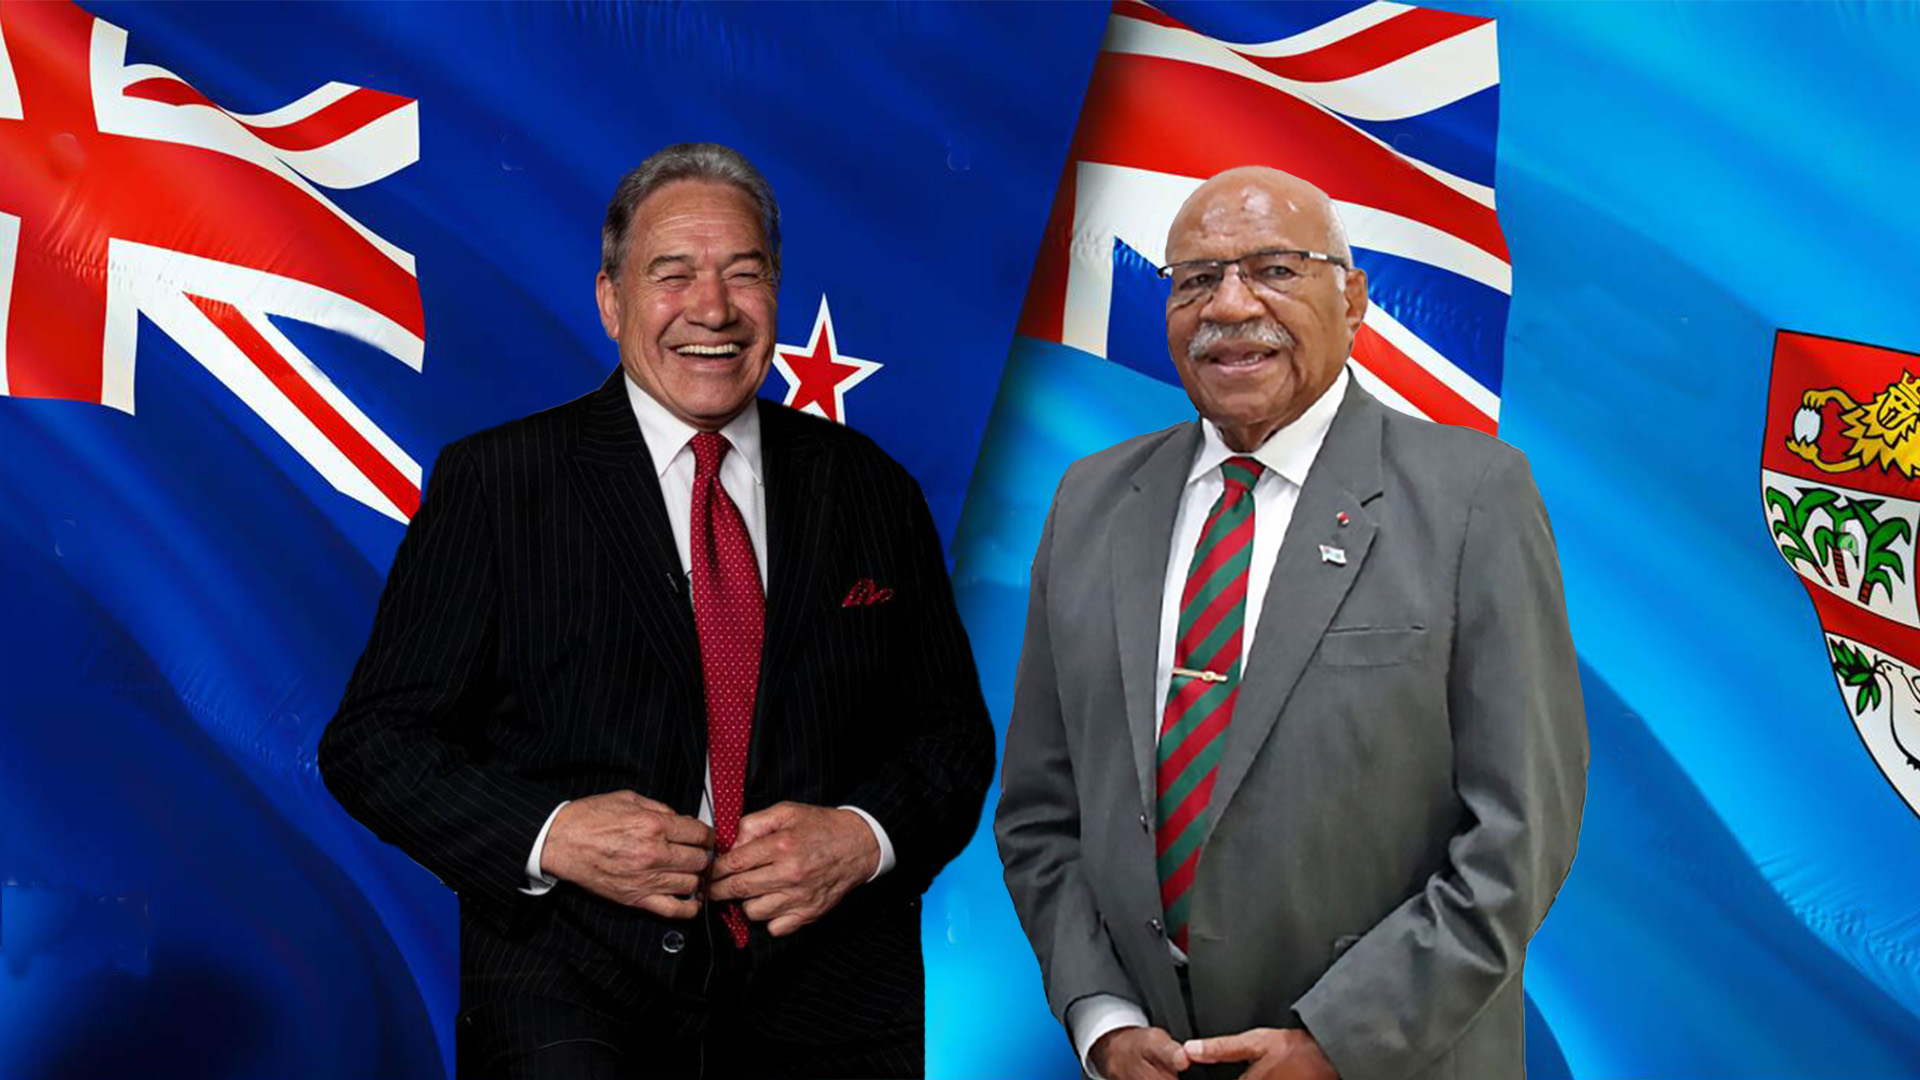 Foreign Affairs Minister meets with Pacific leaders in first…